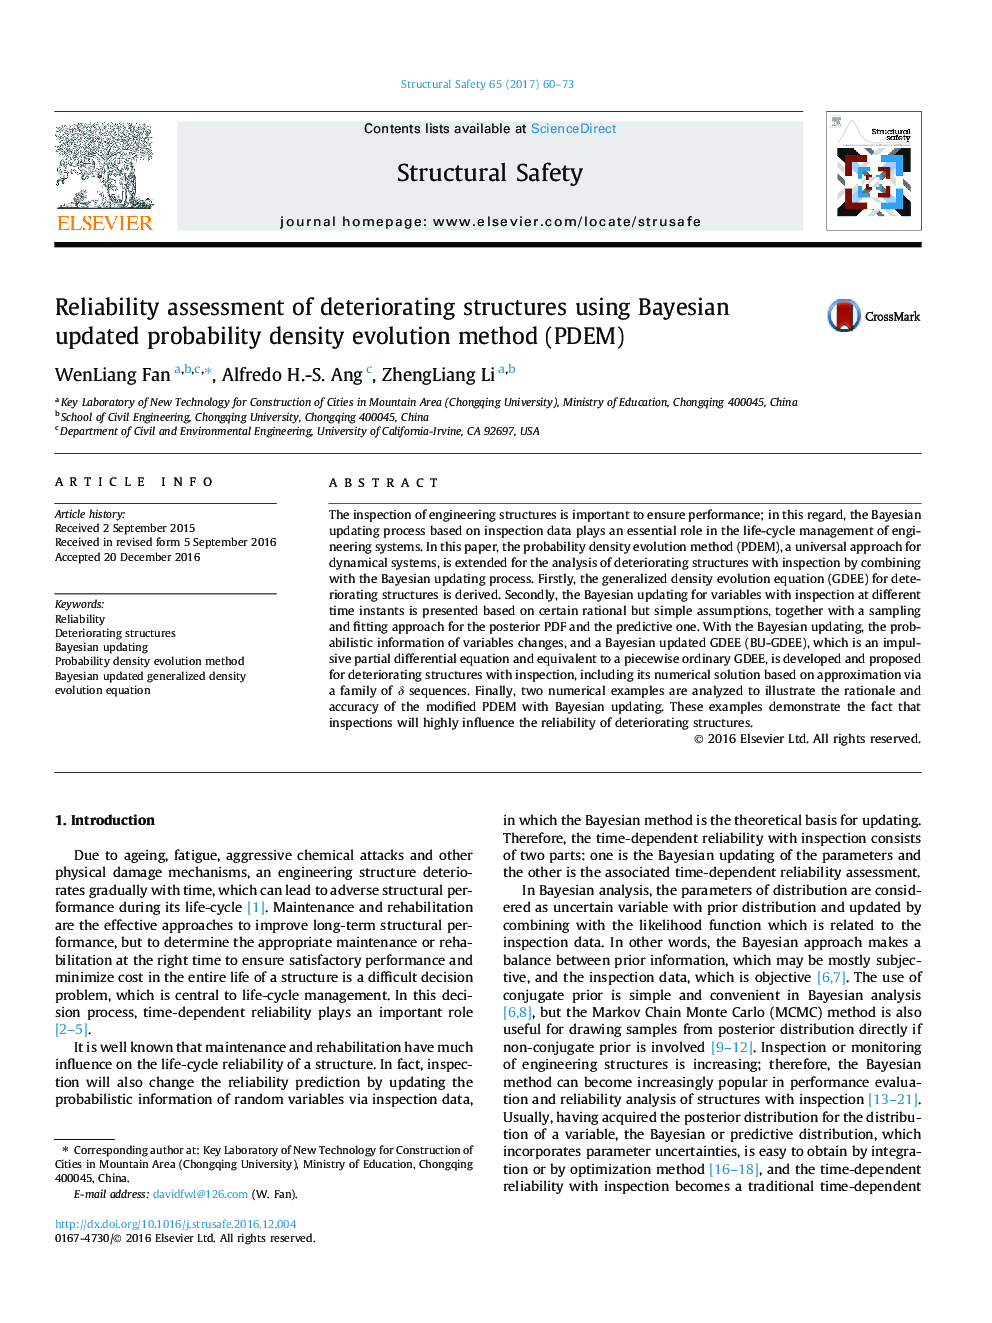 Reliability assessment of deteriorating structures using Bayesian updated probability density evolution method (PDEM)